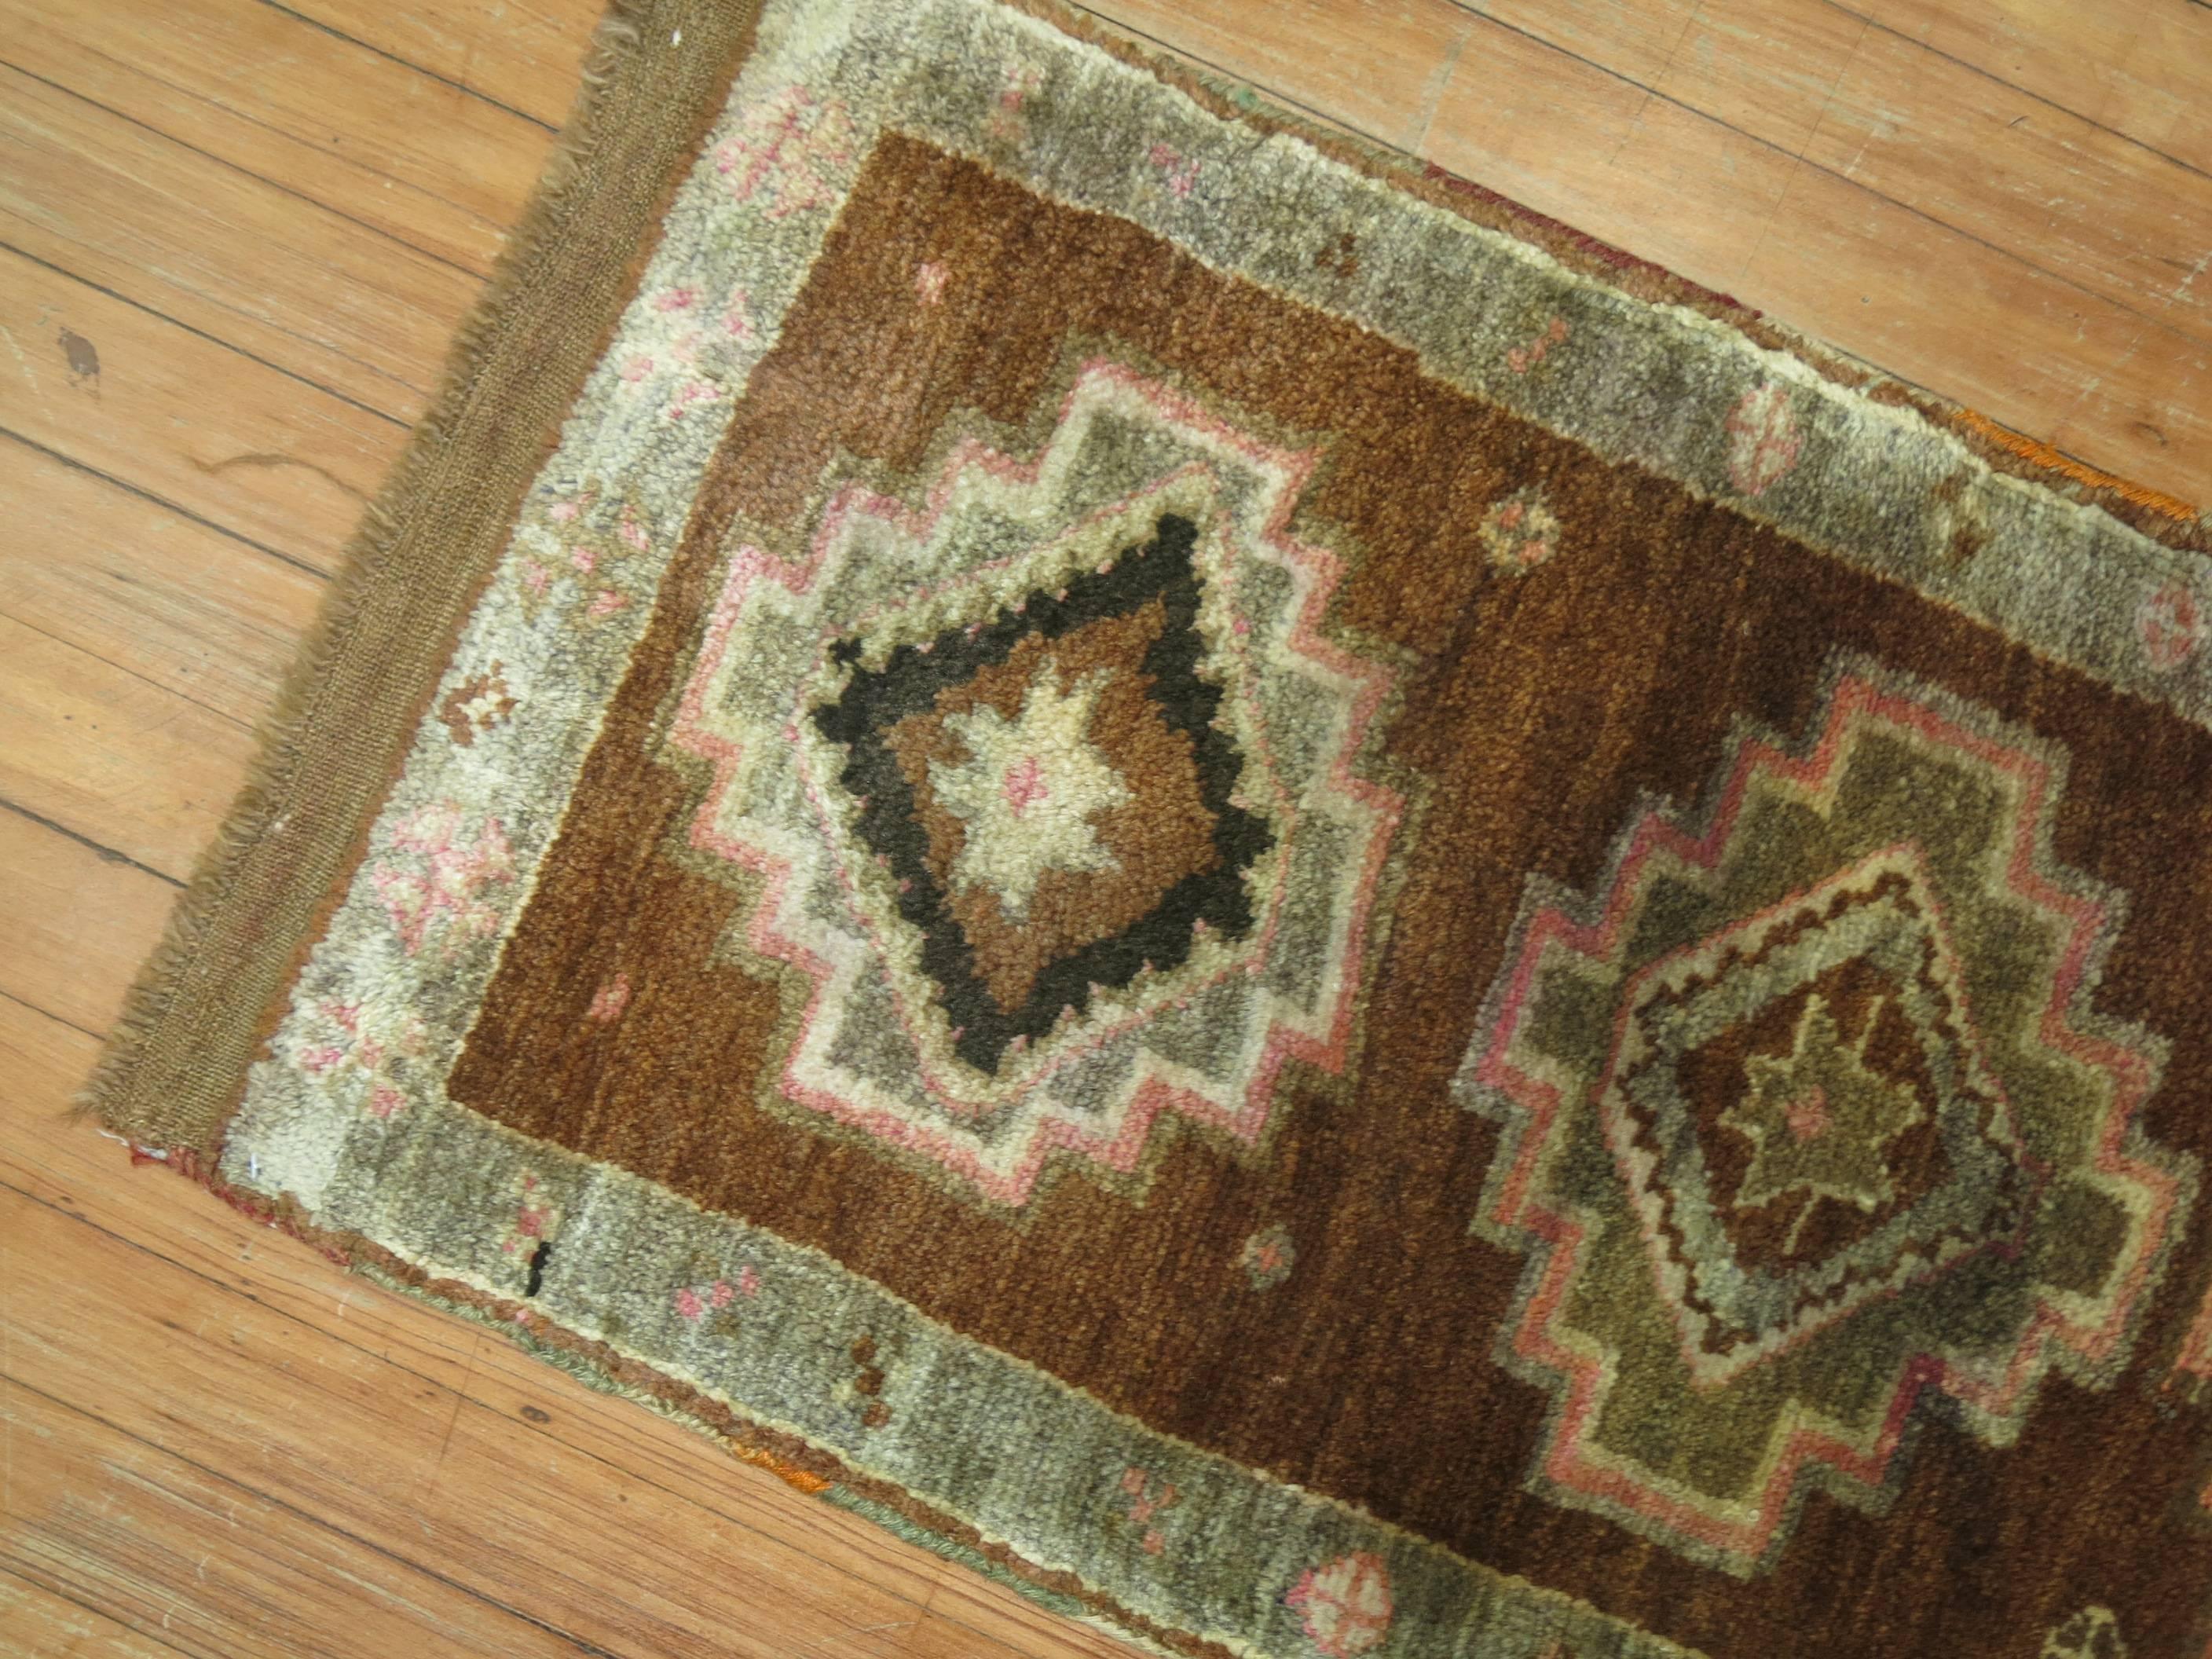 Vintage Oushak with an oatmeal brown field with 3 colorful medallions and a nomadic border.